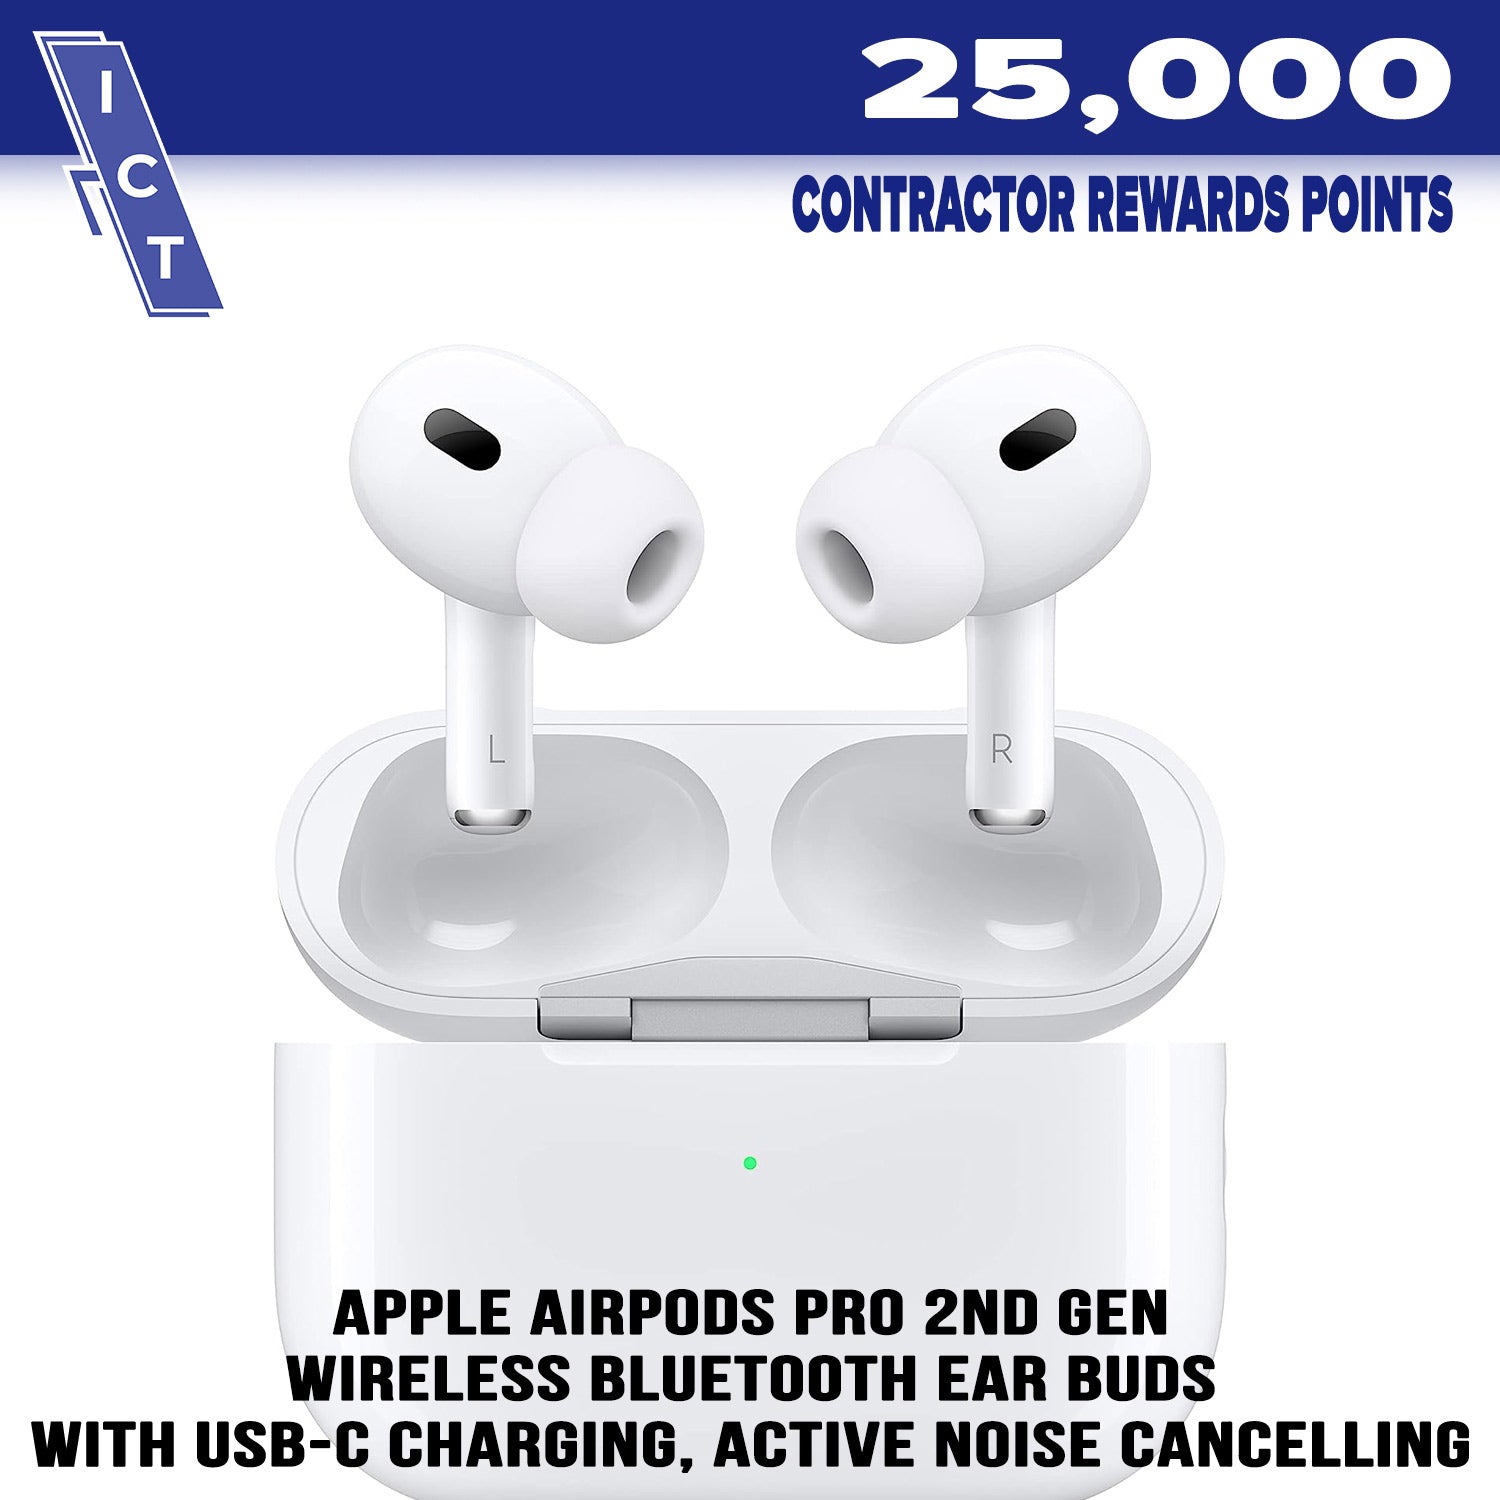 Apple Airpods Pro second generation prize for 25000 points